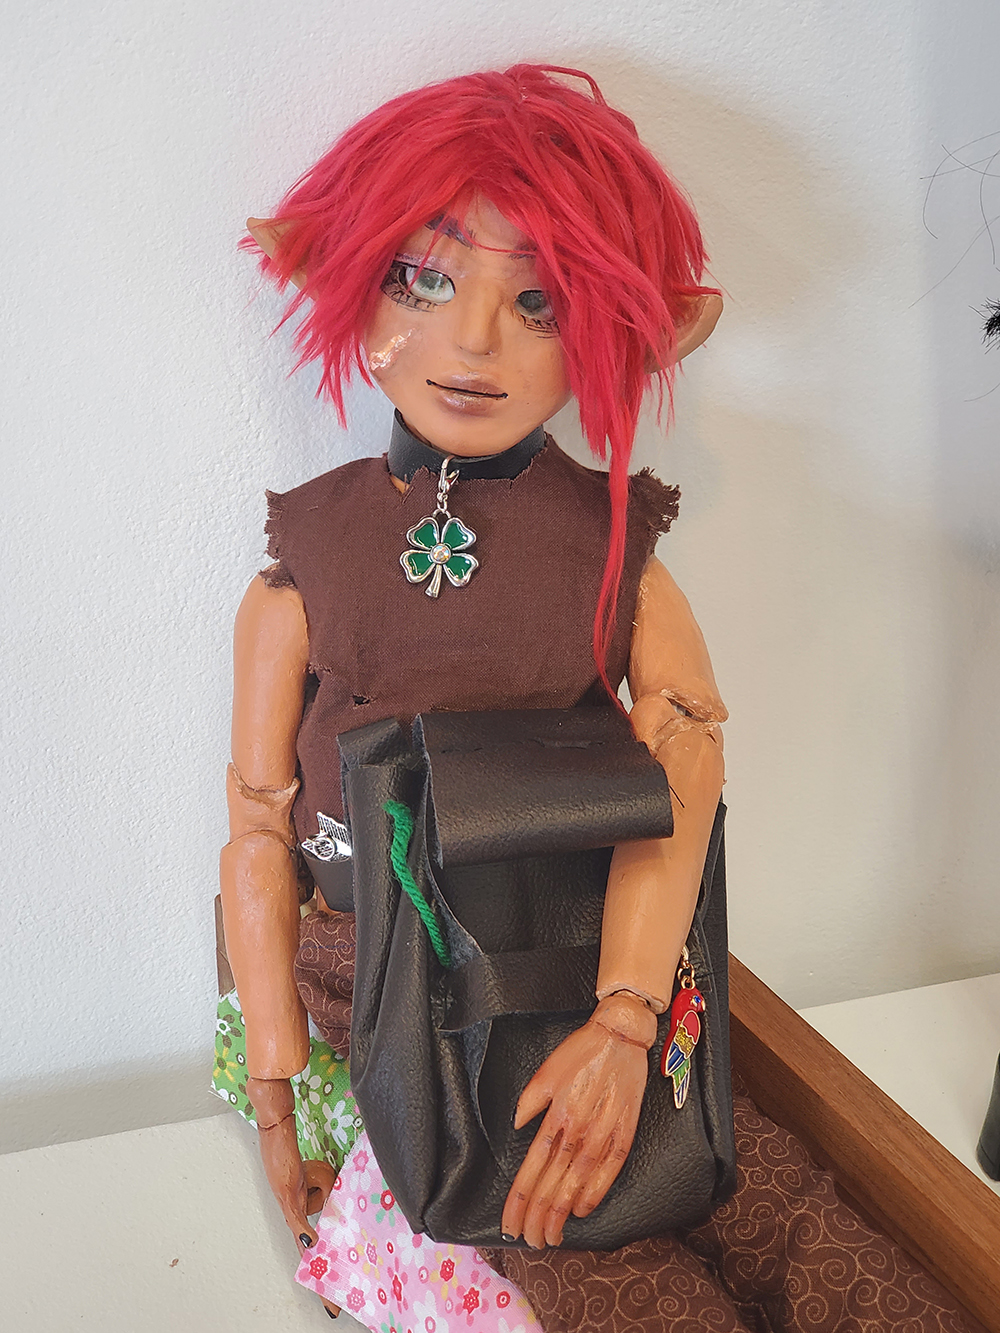 The elven doll is holding a pouch.